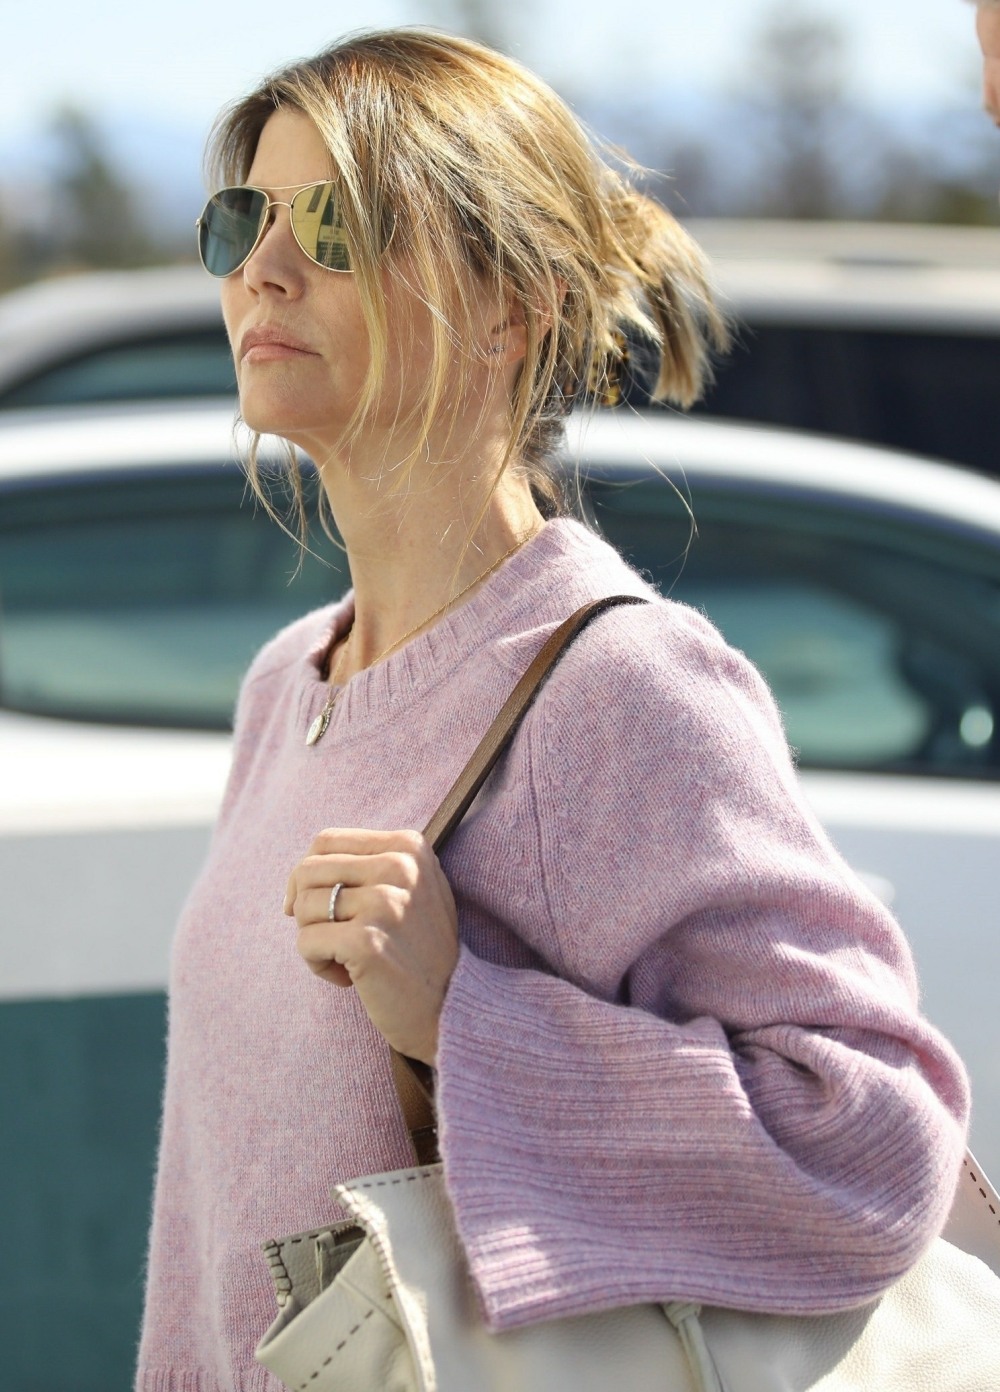 Lori Loughlin is seen out for an appointment